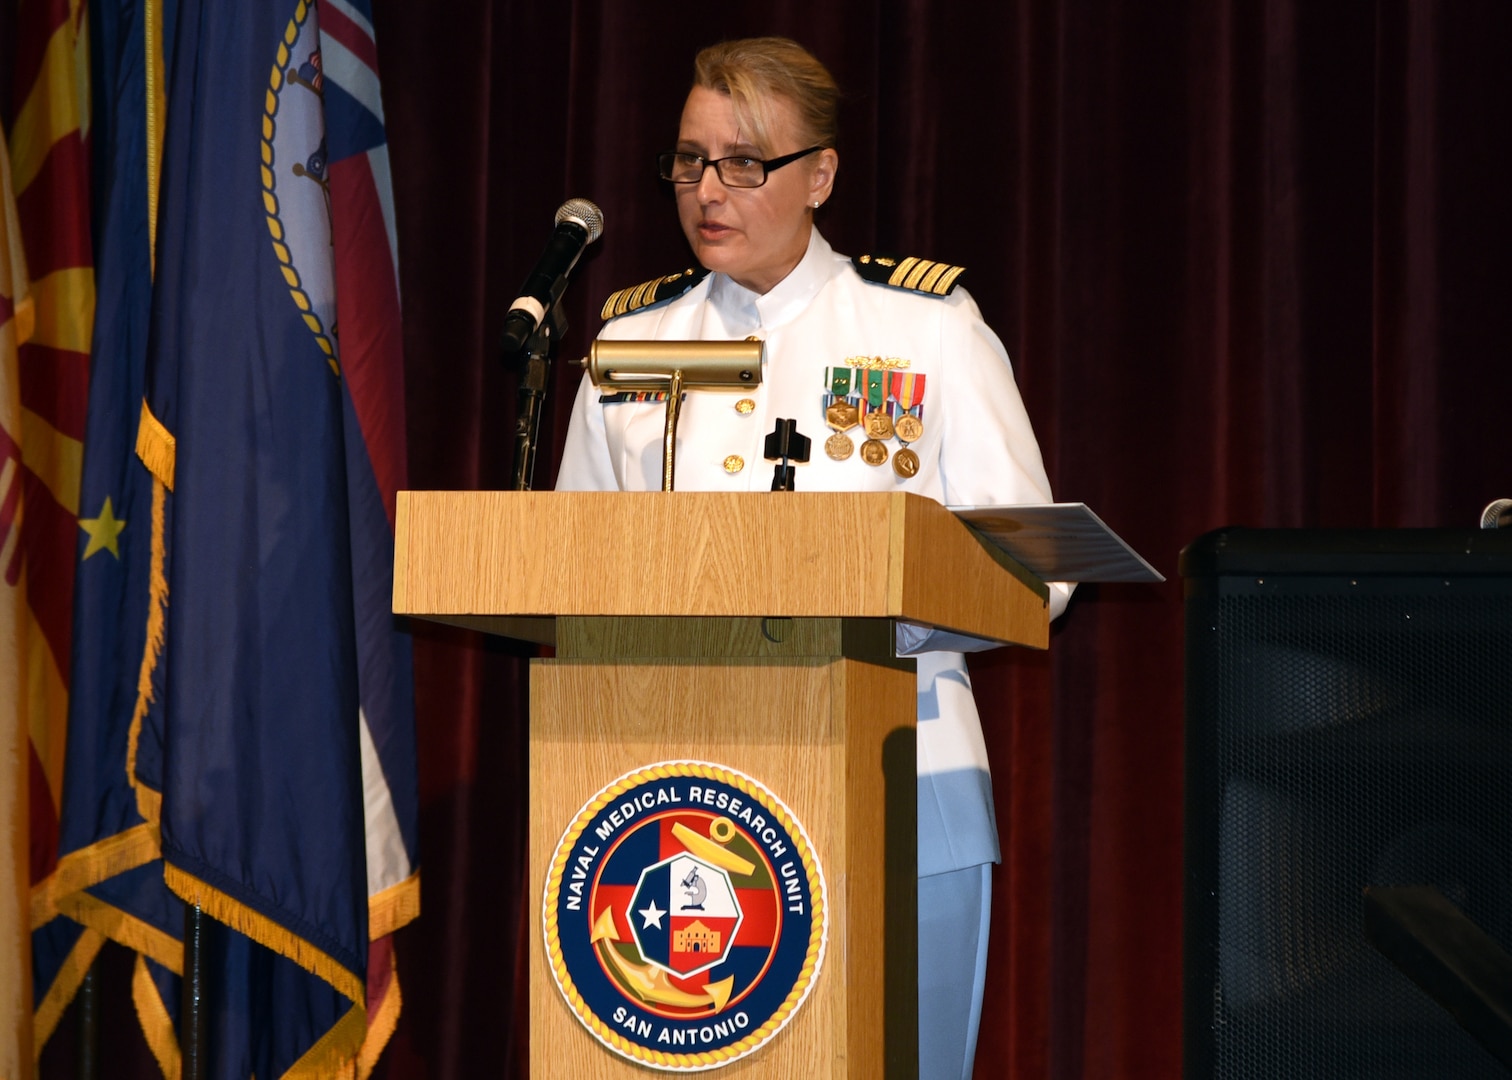 JOINT BASE SAN ANTONIO-FORT SAM HOUSTON – (Aug. 4, 2023) – Capt. Jennifer Buechel, Nurse Corps, of Woodhaven, Mich., speaks to Sailors, Soldiers, and guests after assuming command of Naval Medical Research Unit (NAMRU) San Antonio from Capt. Gerald DeLong, Medical Service Corps (MSC), of Belvidere, Ill., during a Change of Command Ceremony held at the Fort Sam Houston Theatre. Capt. William Deniston, Medical Service Corps, commander, Naval Medical Research Command (NMRC) presided over the ceremony and Capt. Robert Hawkins, director, J3/5/7, Defense Health Agency (DHA) and director, U.S. Navy Nurse Corps, served as the guest speaker. NAMRU San Antonio’s mission is to conduct gap driven combat casualty care, craniofacial, and directed energy research to improve survival, operational readiness, and safety of Department of Defense (DoD) personnel engaged in routine and expeditionary operations. It is one of the leading research and development laboratories for the U.S. Navy under the DoD and is one of eight subordinate research commands in the global network of laboratories operating under NMRC in Silver Spring, Md. (U.S. Navy photo by Burrell Parmer, NAMRU San Antonio Public Affairs/Released)